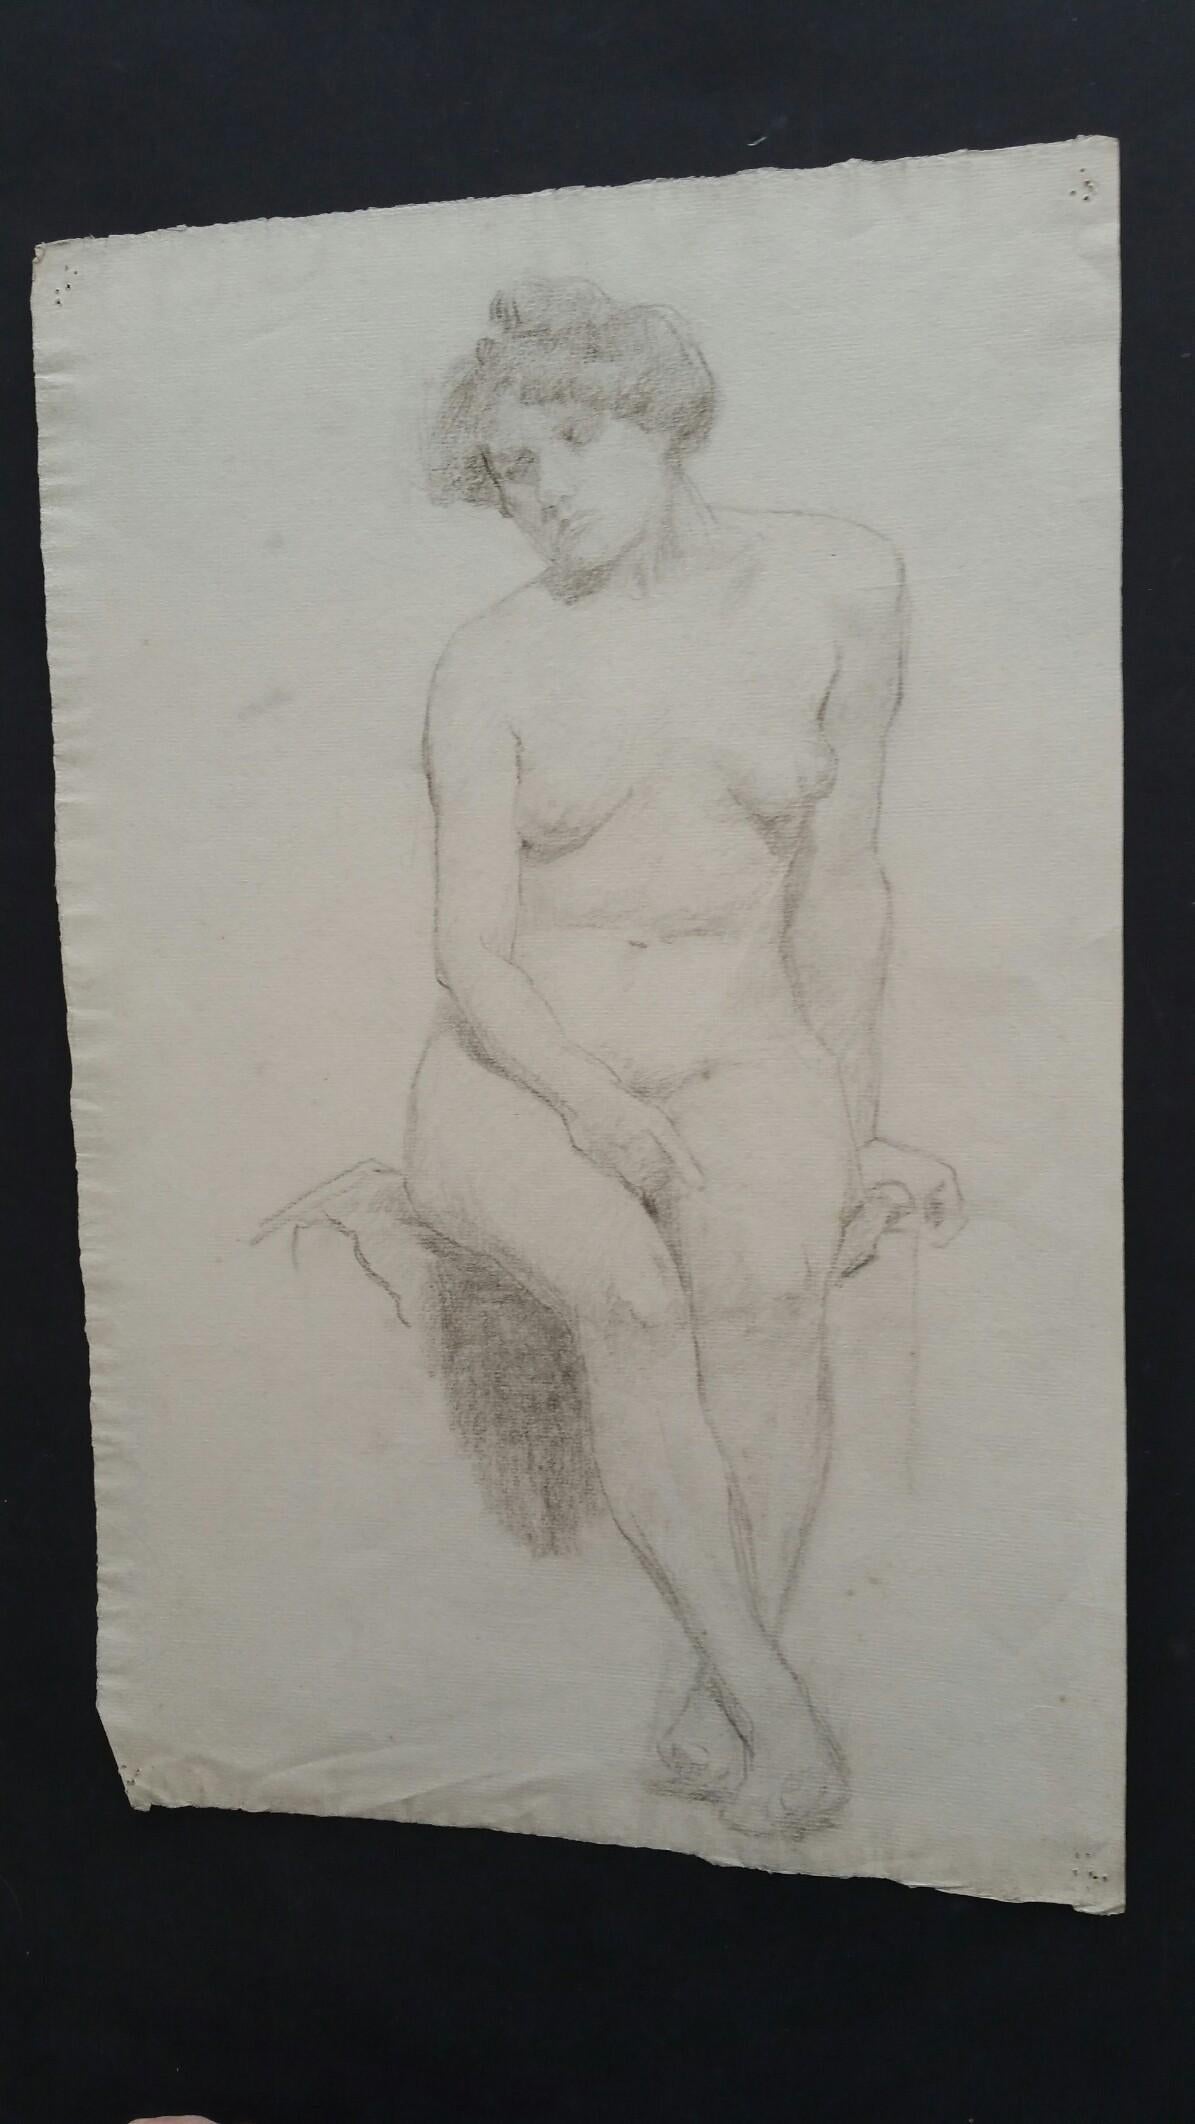 English Graphite Sketch of a Female Nude, Seated
by Henry George Moon (British 1857-1905)
on off white artists paper, unframed
measurements: sheet 18.5 x 12 inches 

provenance: from the artists estate

Condition report: pin holes to corners